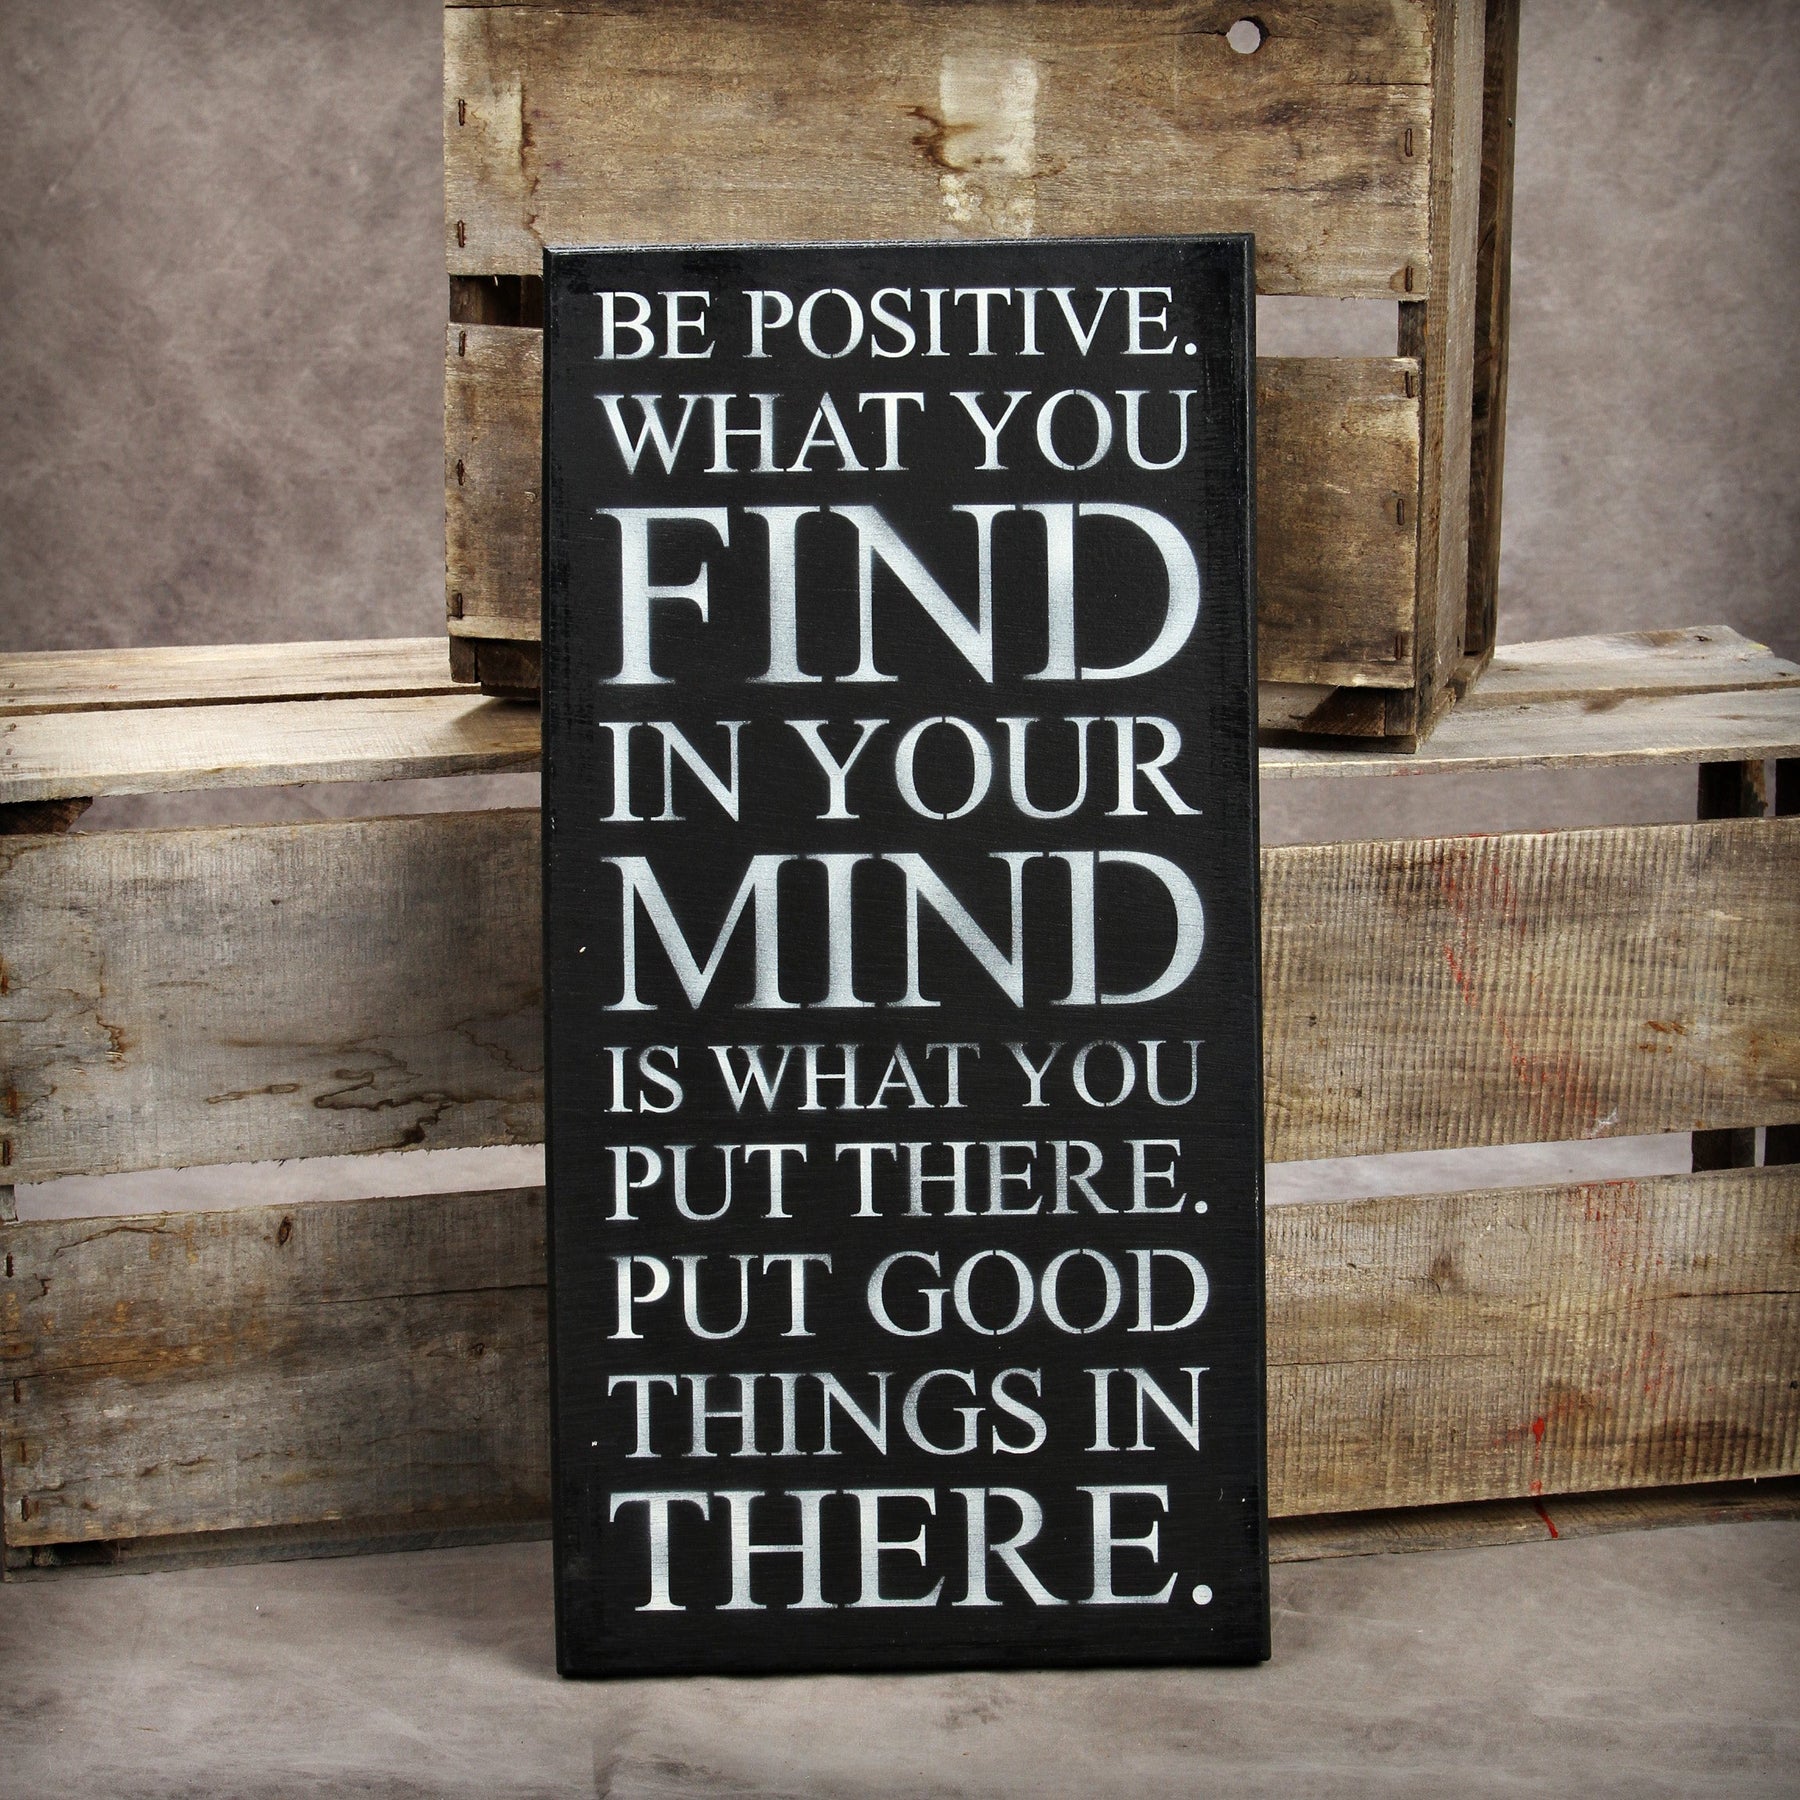 Be positive what you find in your mind is what you put there. Put good things in there. / 12"x24" Reclaimed Wood Sign